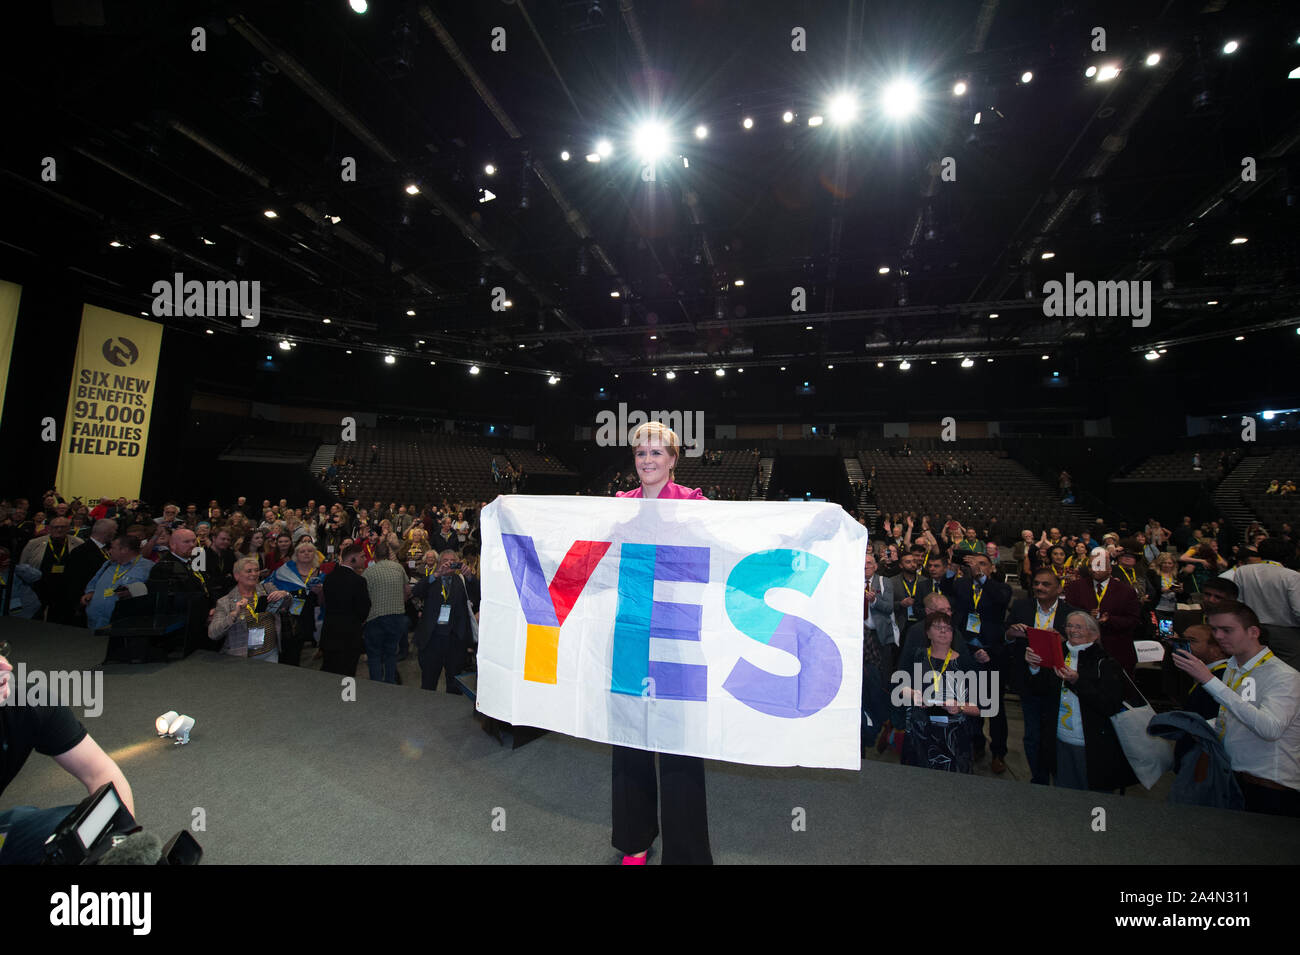 Aberdeen, UK. 15 October 2019.  Pictured: Nicola Sturgeon - First Minister of Scotland and Leader of the Scottish National Party (SNP) delivers her keynote speech on getting Scottish Independence to close the Scottish National Party Conference, Aberdeen, UK. The Event Complex Aberdeen (TECA). Credit: Colin Fisher/Alamy Live News Stock Photo